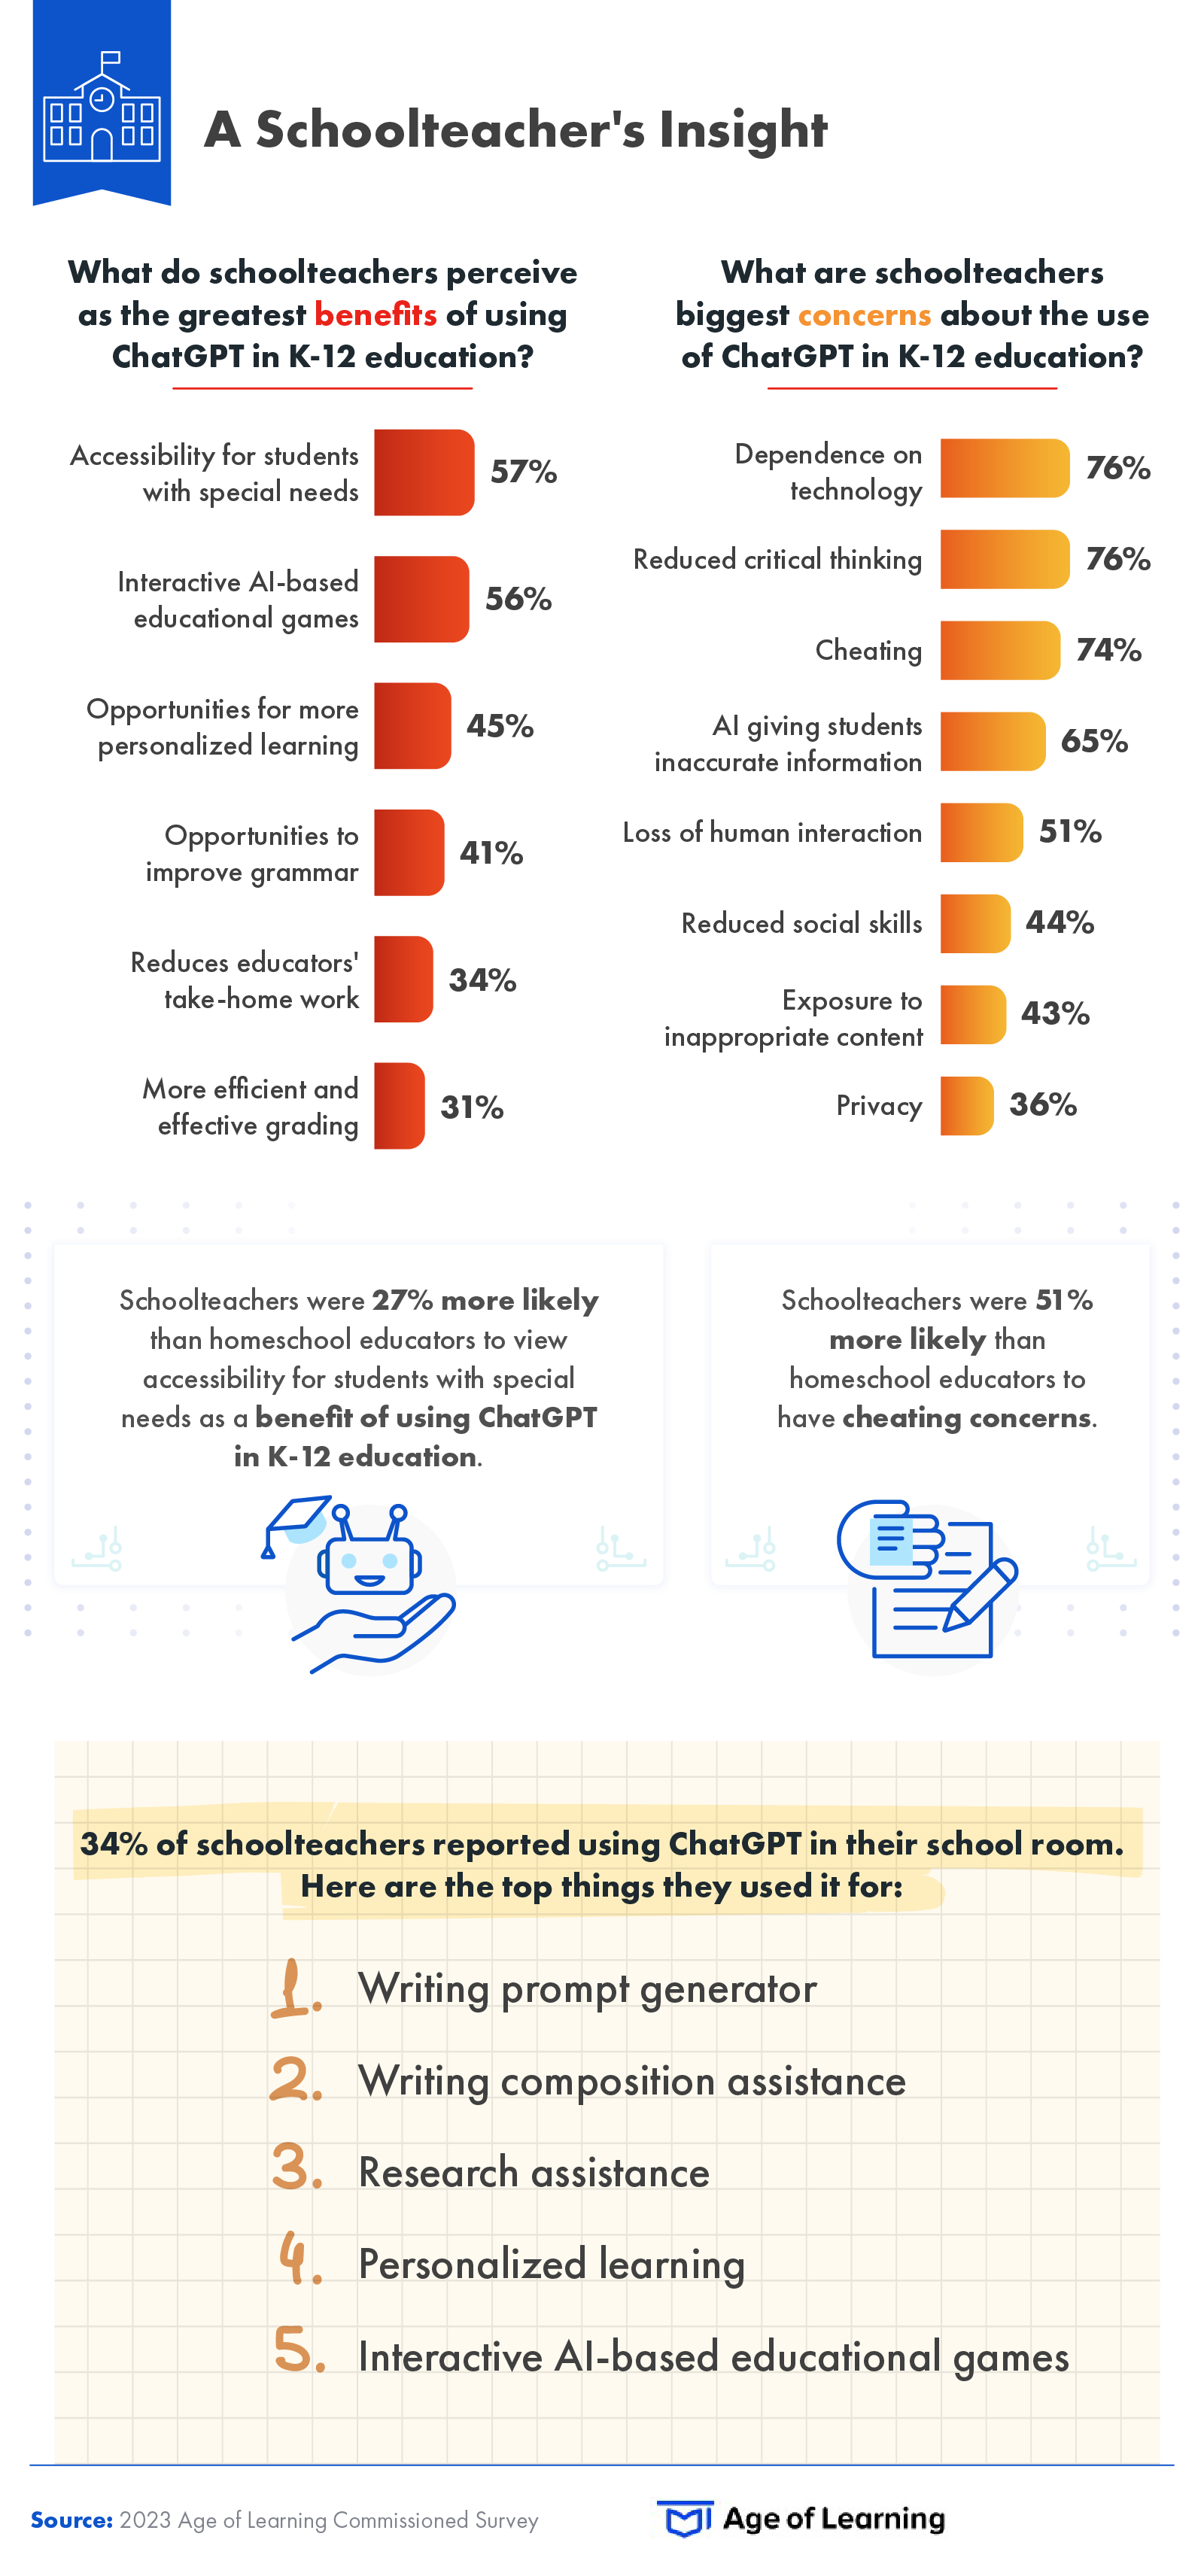 This infographic explores schoolteachers perceived benefits and concerns of using ChatGPT in K-12 education. 